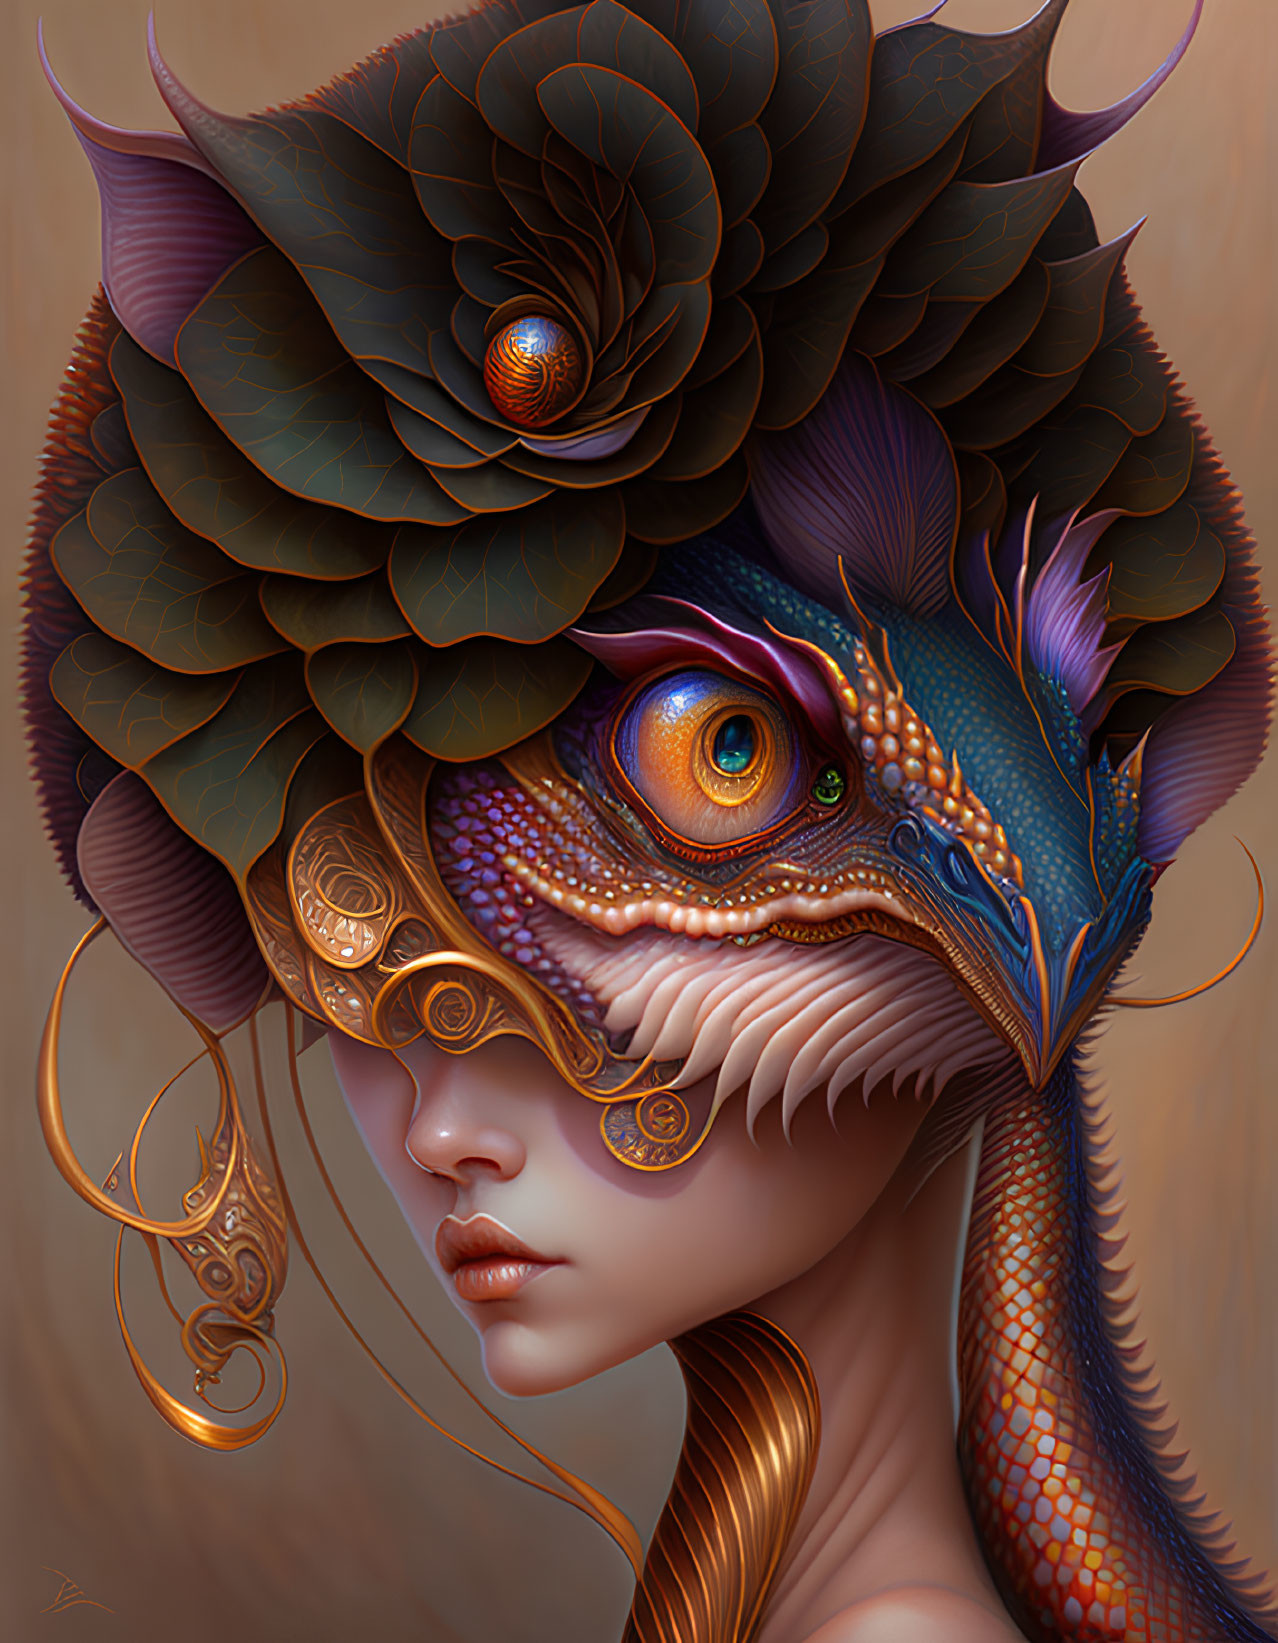 Digital artwork: Woman with peacock mask, intricate feathers